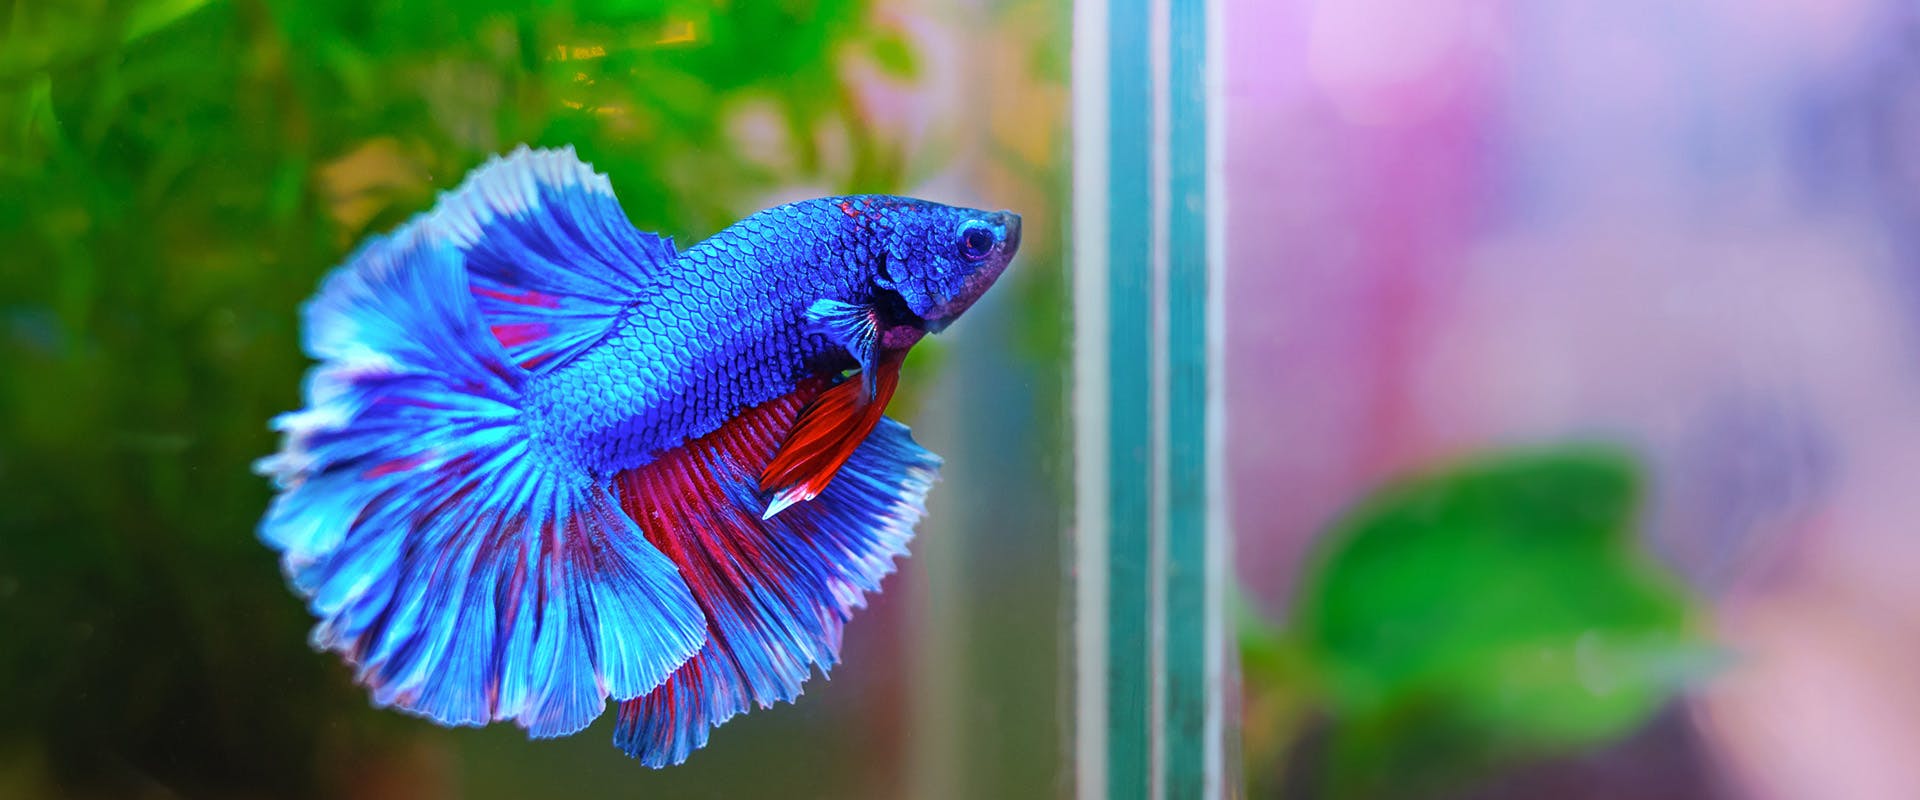 A brightly coloured blue betta fish swimming in a tank